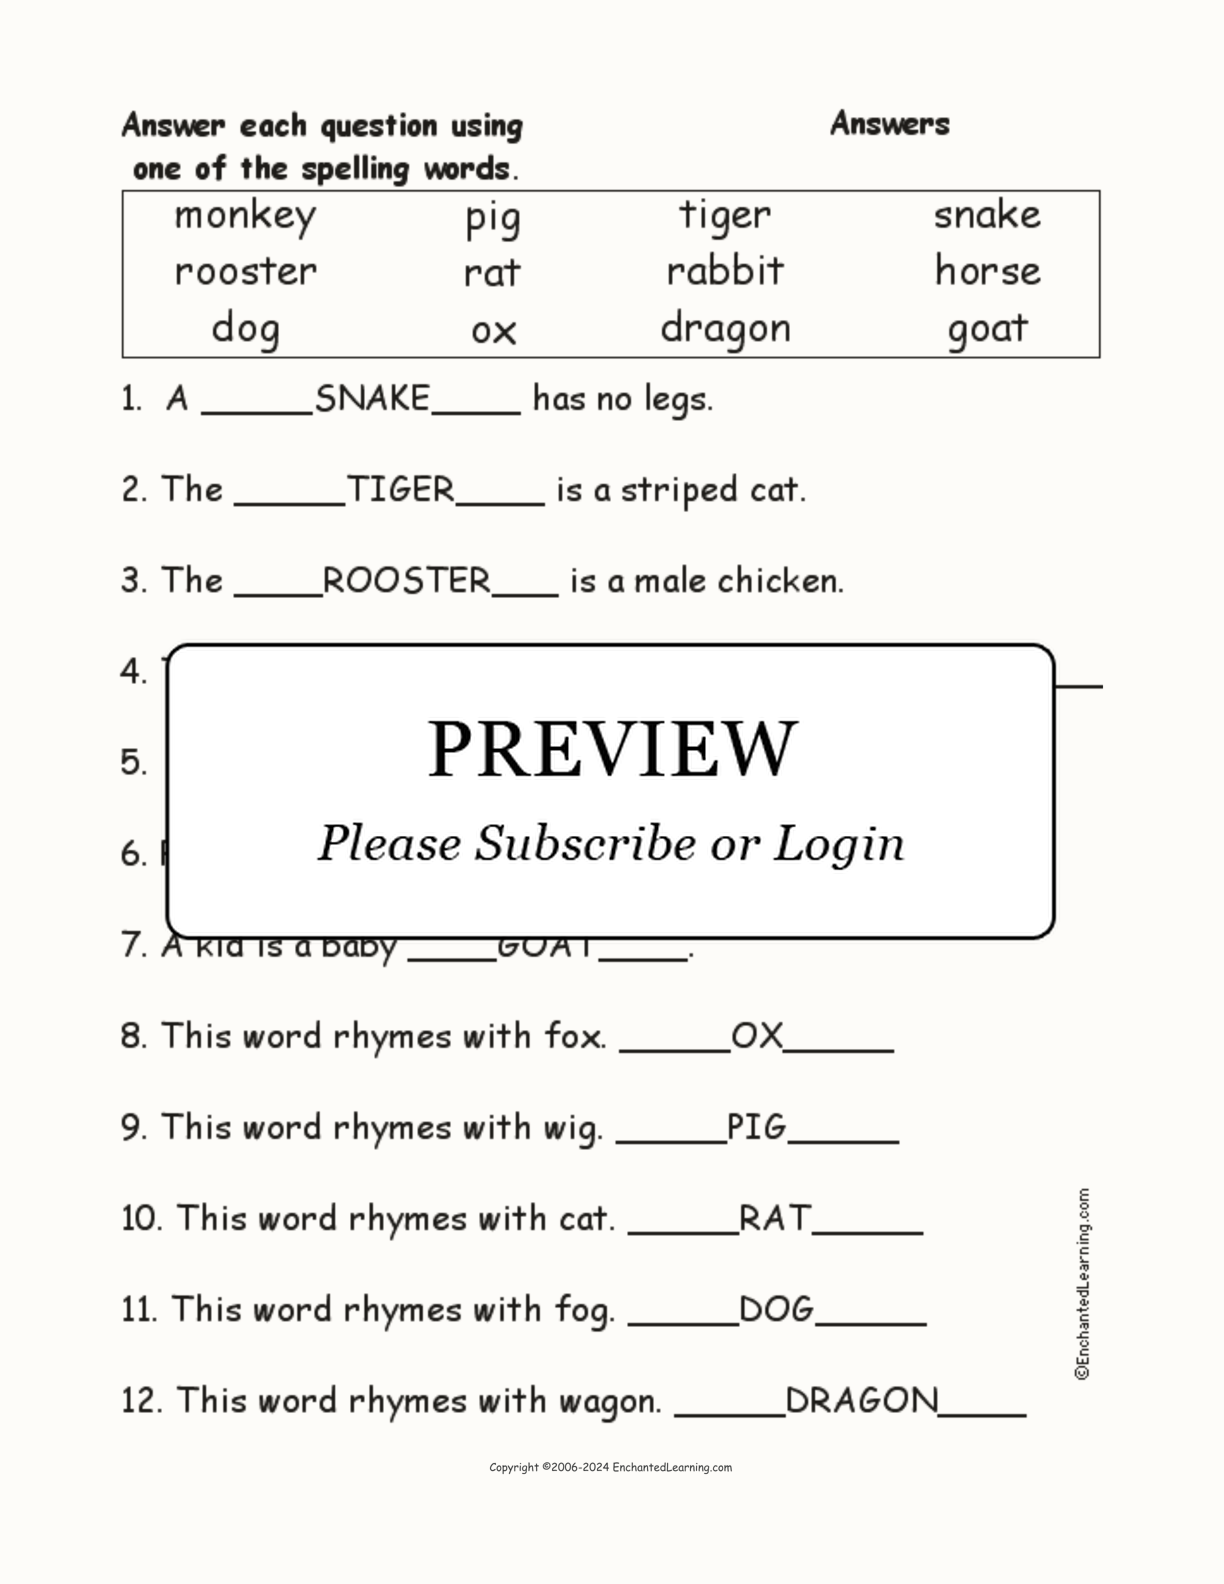 Chinese Zodiac Animals: Spelling Word Questions interactive worksheet page 2